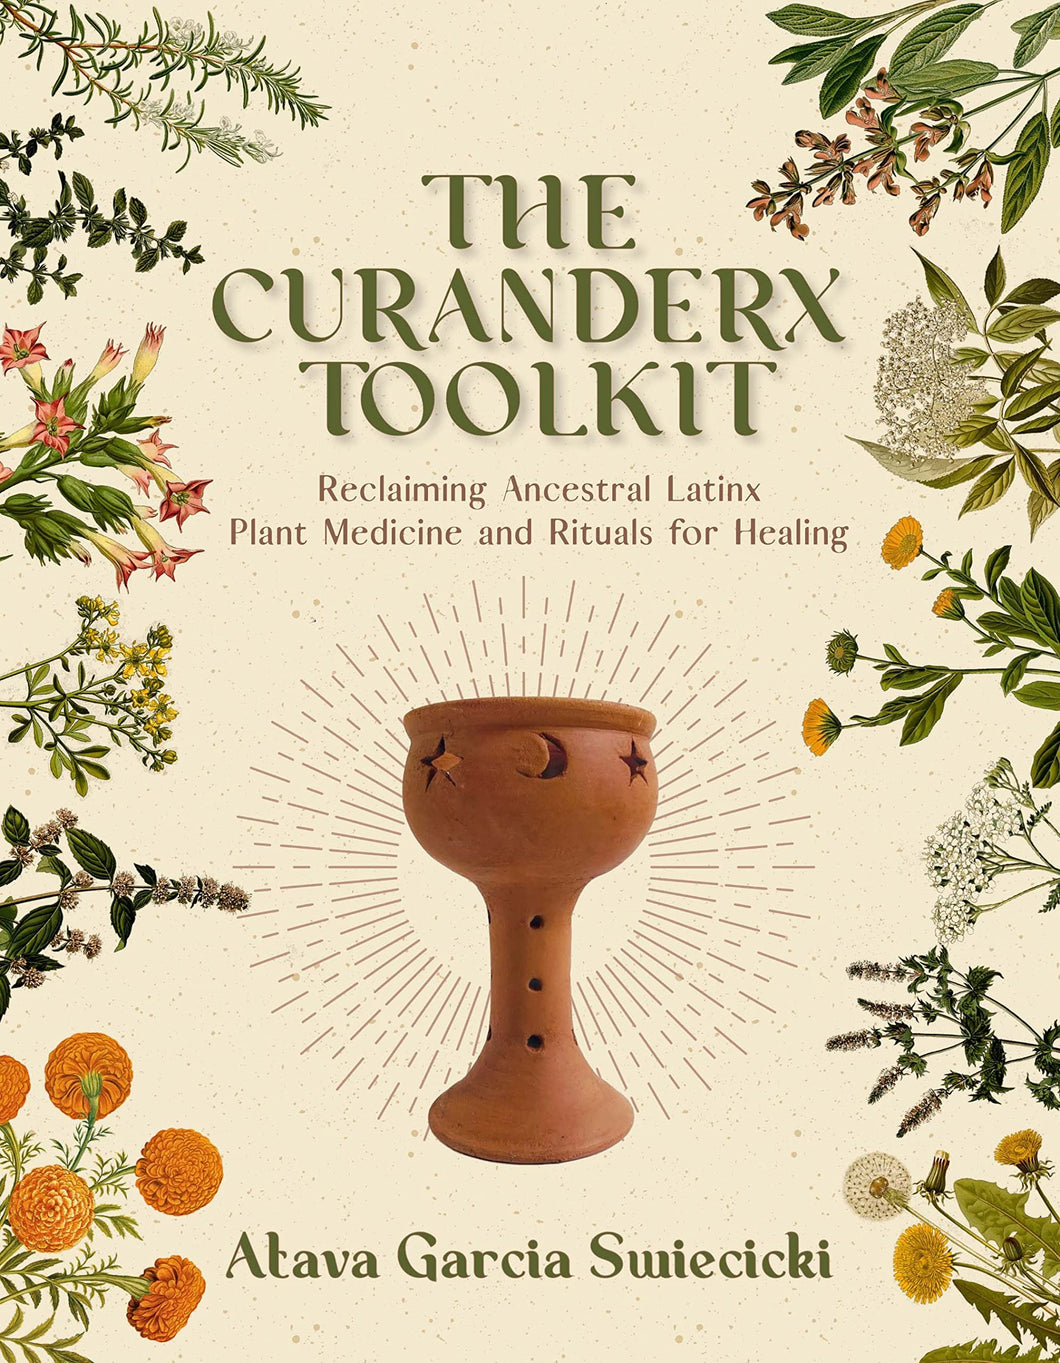 The Curanderx Toolkit: Reclaiming Ancestral Latinx Plant Medicine and Rituals for Healing by Atava Garcia Swiecicki